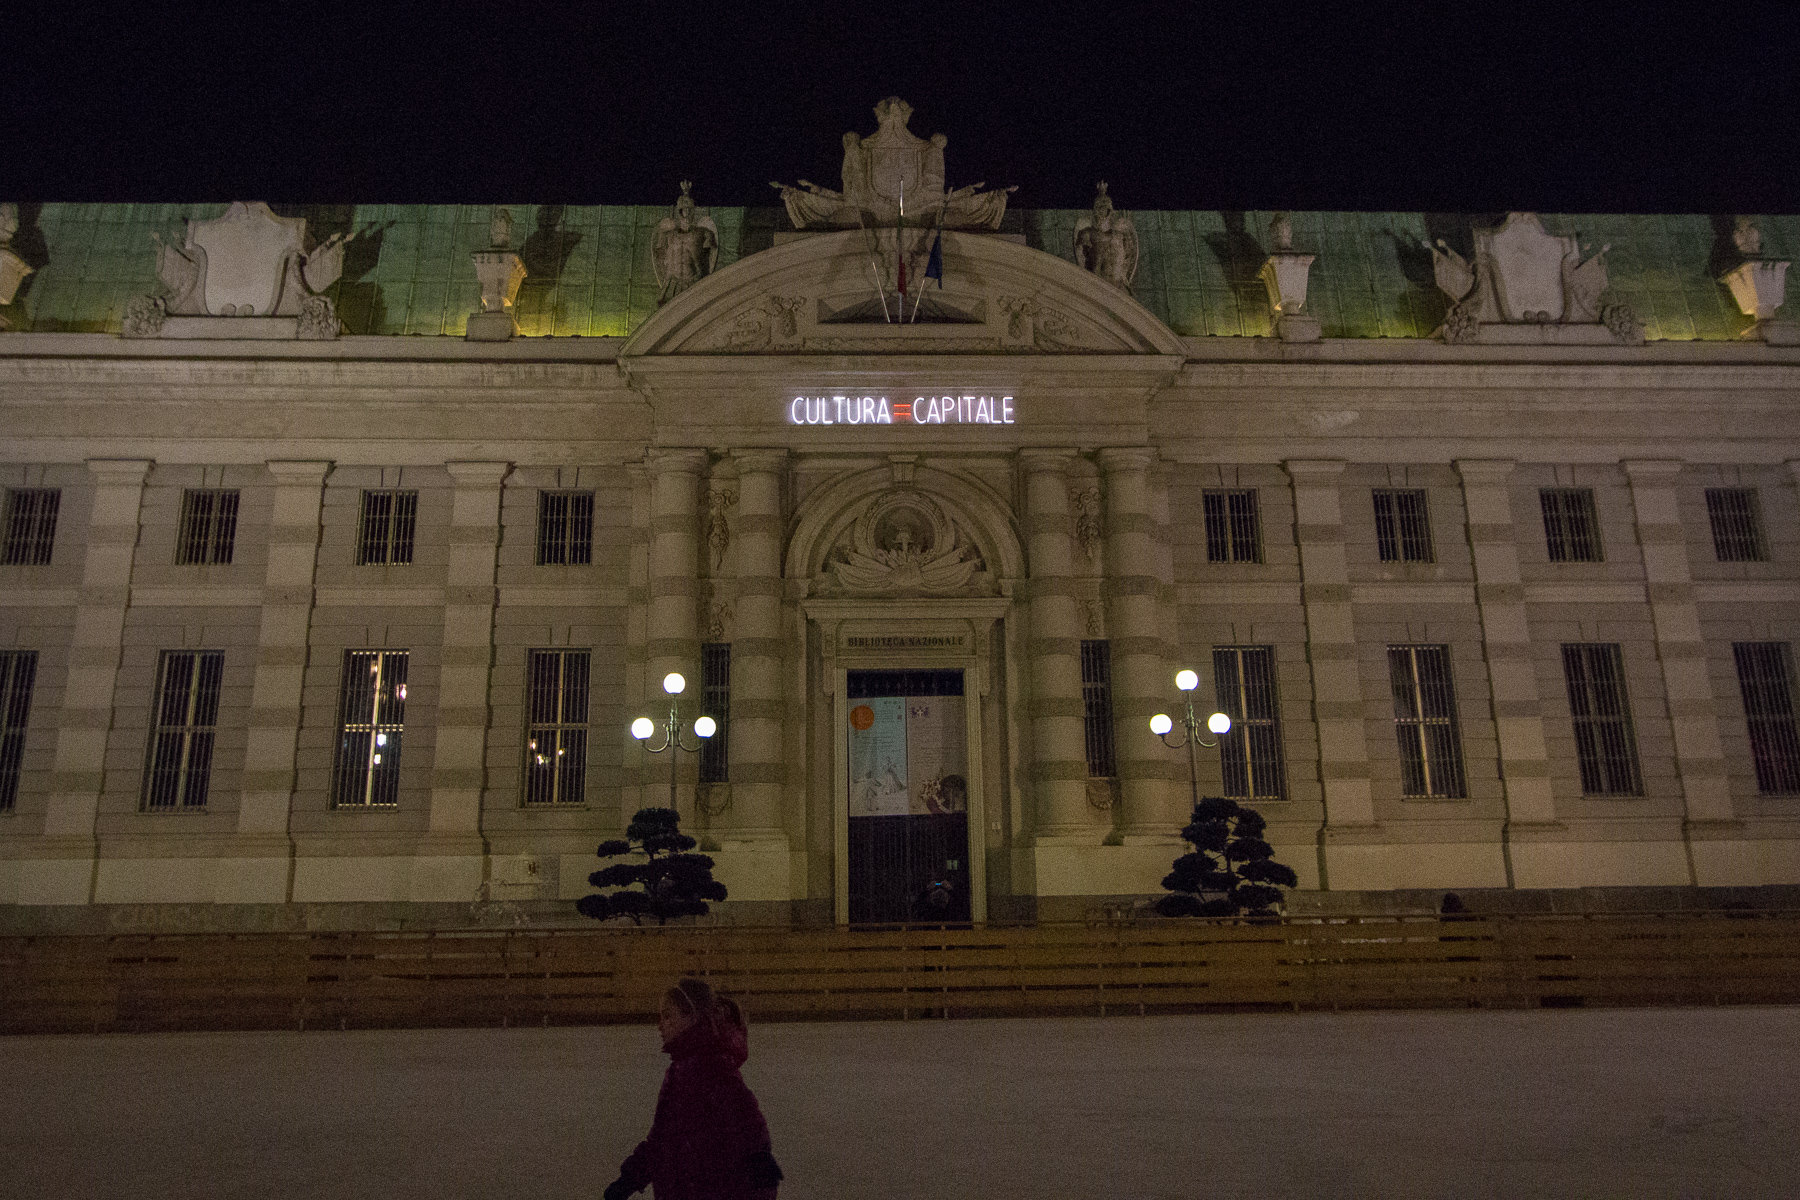 In Piazza Carlo Alberto, Alfredo Jaar's 'CULTURA = CAPITALE' is part of the Luci d'Artista since 2013. Jaar's work is a luminous equation inspired by the work of Joseph Beuys: 'Kunst = Kapital' (Art = Capital), which in turn interprets Karl Marx theory. - In piazza Carlo Alberto, dal 2013 far parte delle Luci d’Artista 'CULTURA = CAPITALE’ di Alfredo Jaar. Il lavoro di Jaar è un’equazione luminosa che trae ispirazione dall’opera di Joseph Beuys, ‘Kunst = Kapital’ (Arte = Capitale), che a sua volta rilegge la teoria di Karl Marx.